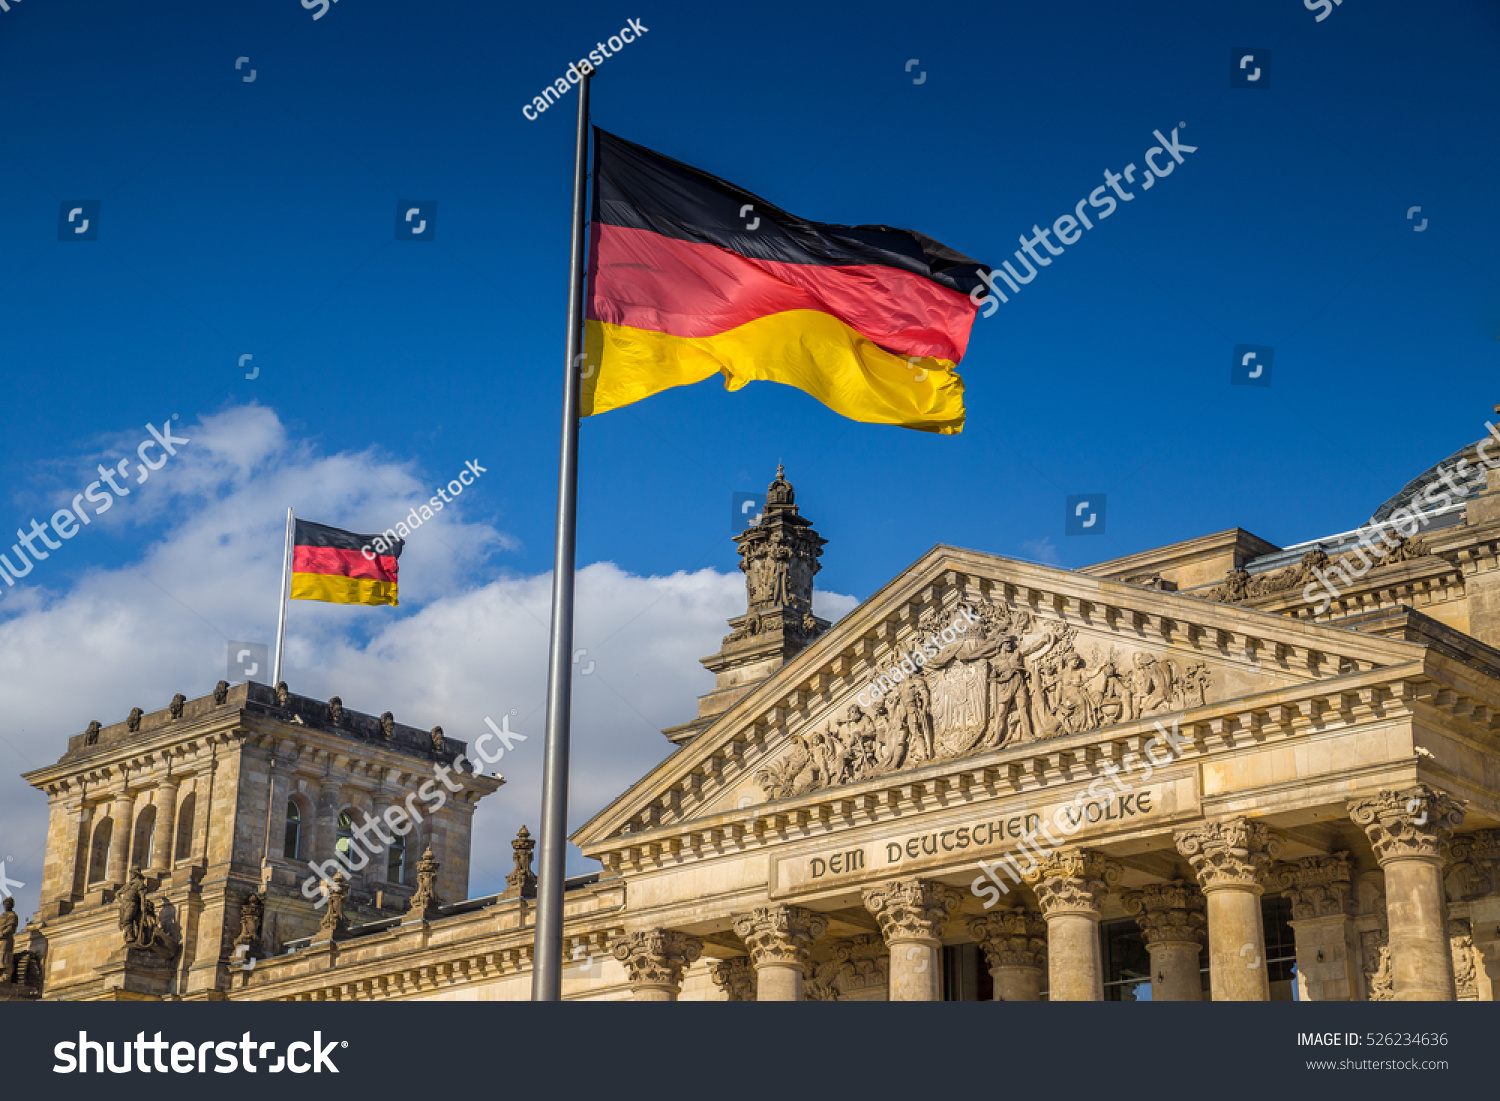 German flags waving in the wind at famous Reichstag building, seat of the German Parliament (Deutscher Bundestag), on a sunny day with blue sky and clouds, central Berlin Mitte district, Germany #526234636